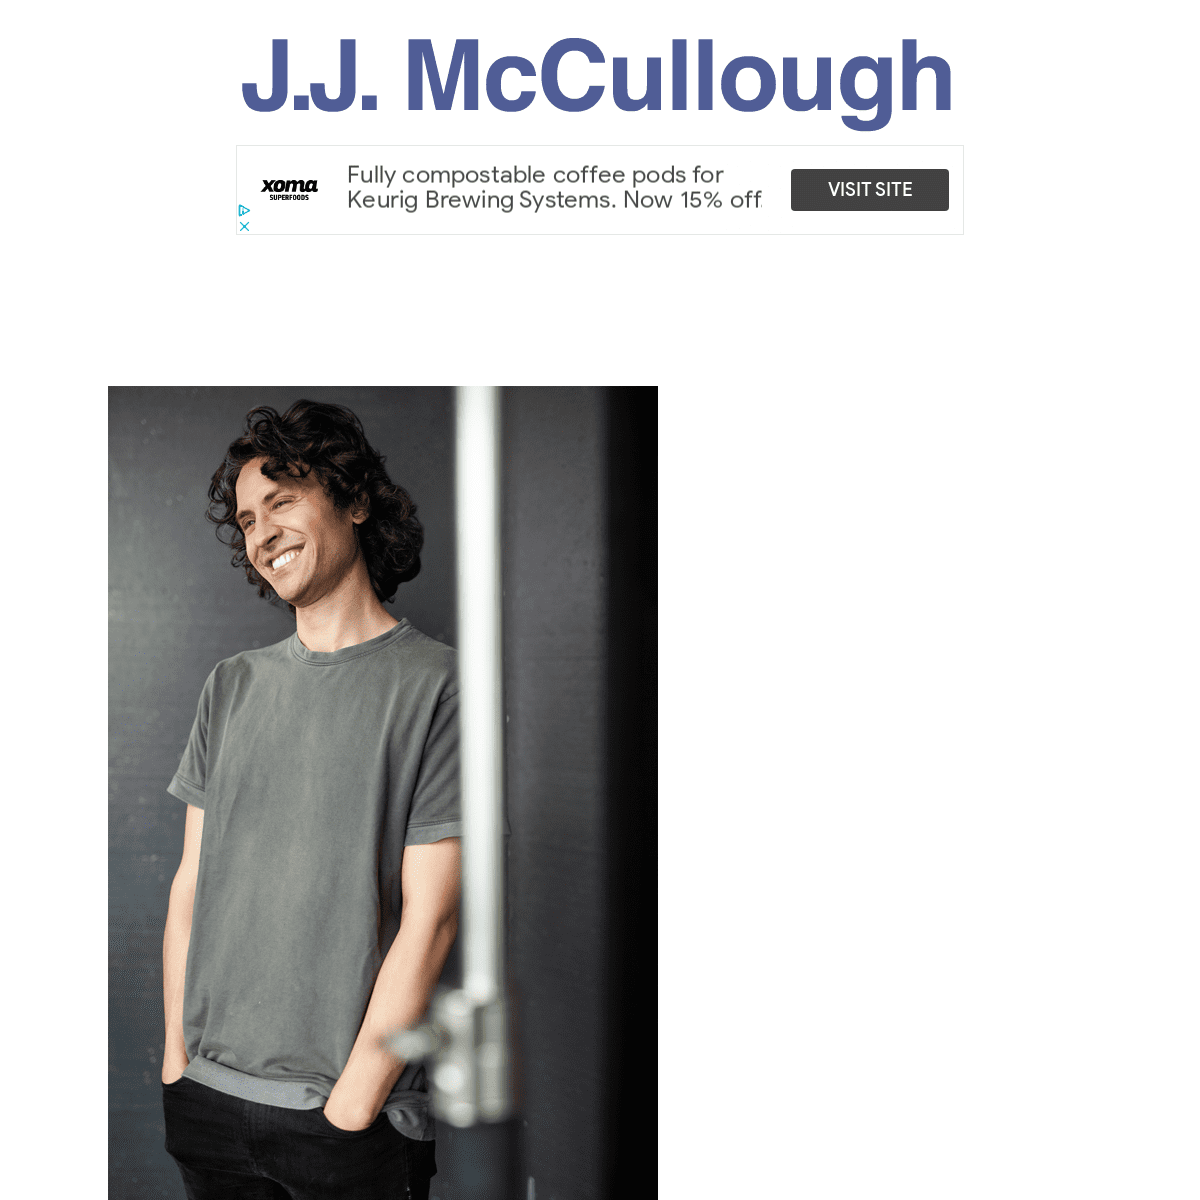 A complete backup of https://jjmccullough.com